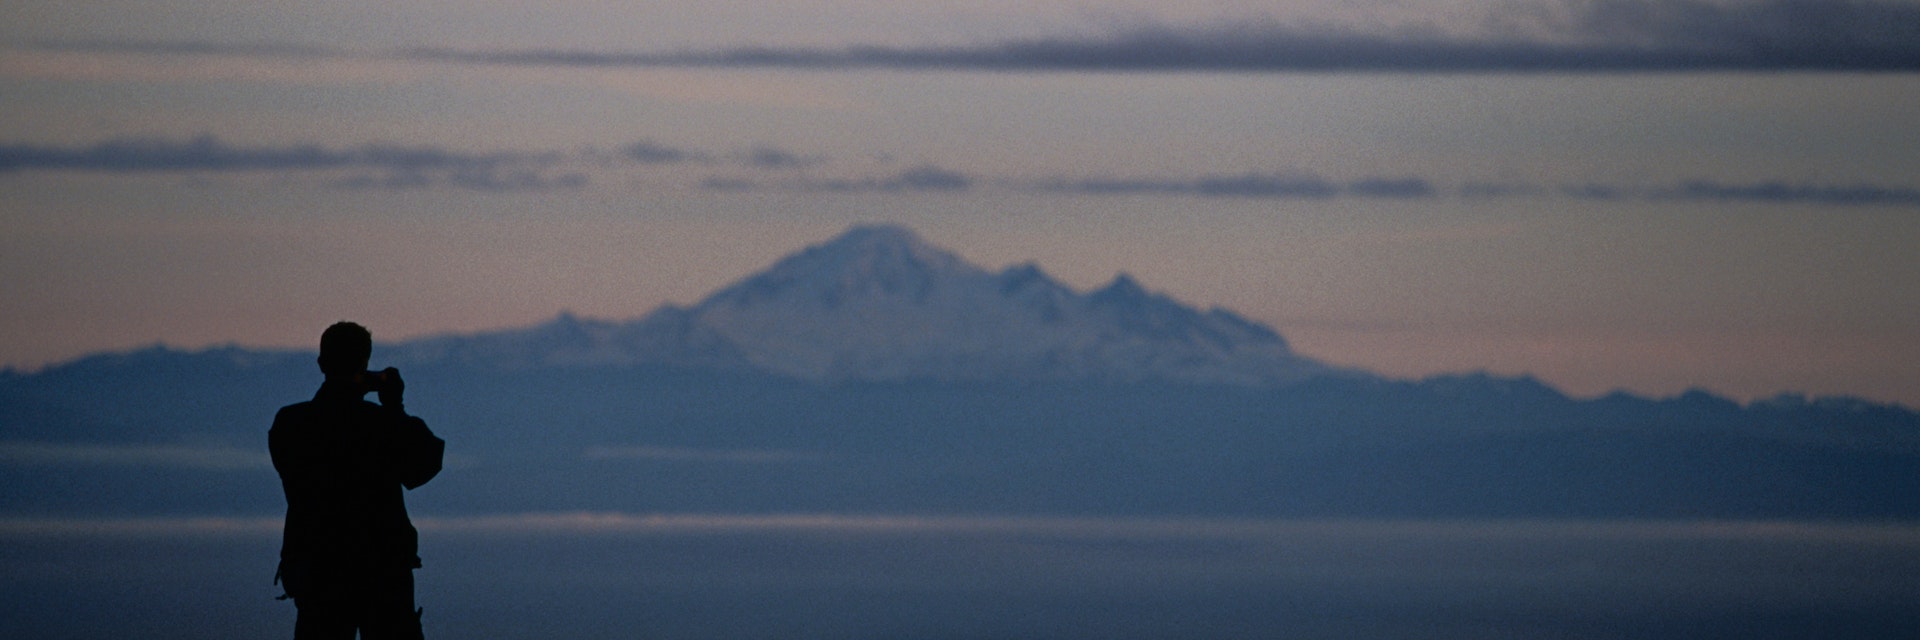 Mt Baker in Washington, USA, from Grouse Mountain.